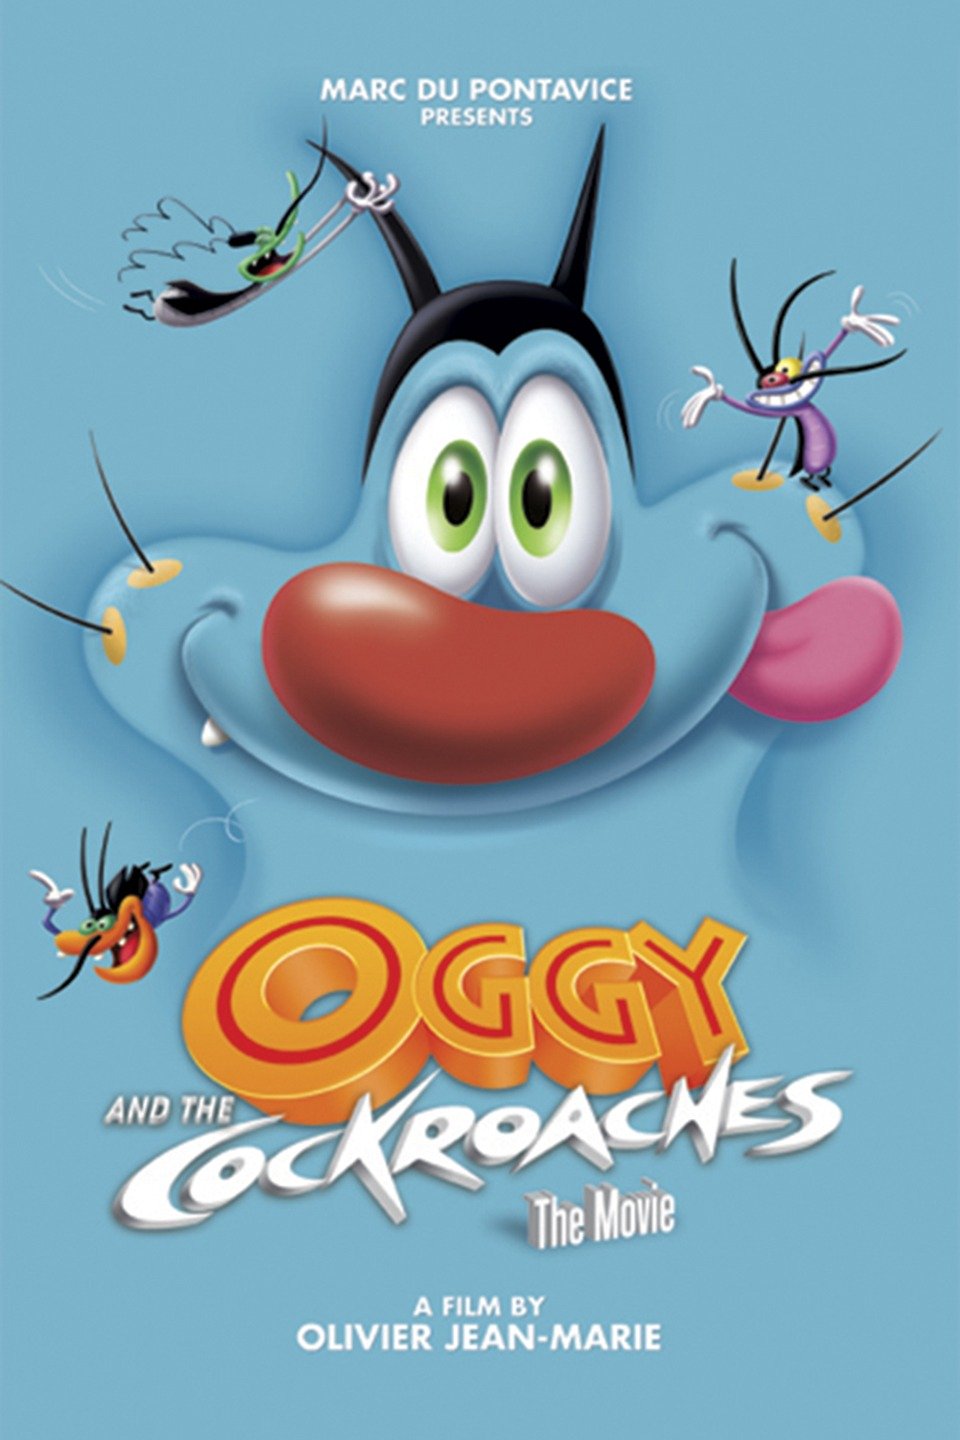 Oggy and the Cockroaches: The Movie (2013) | Soundeffects Wiki | Fandom